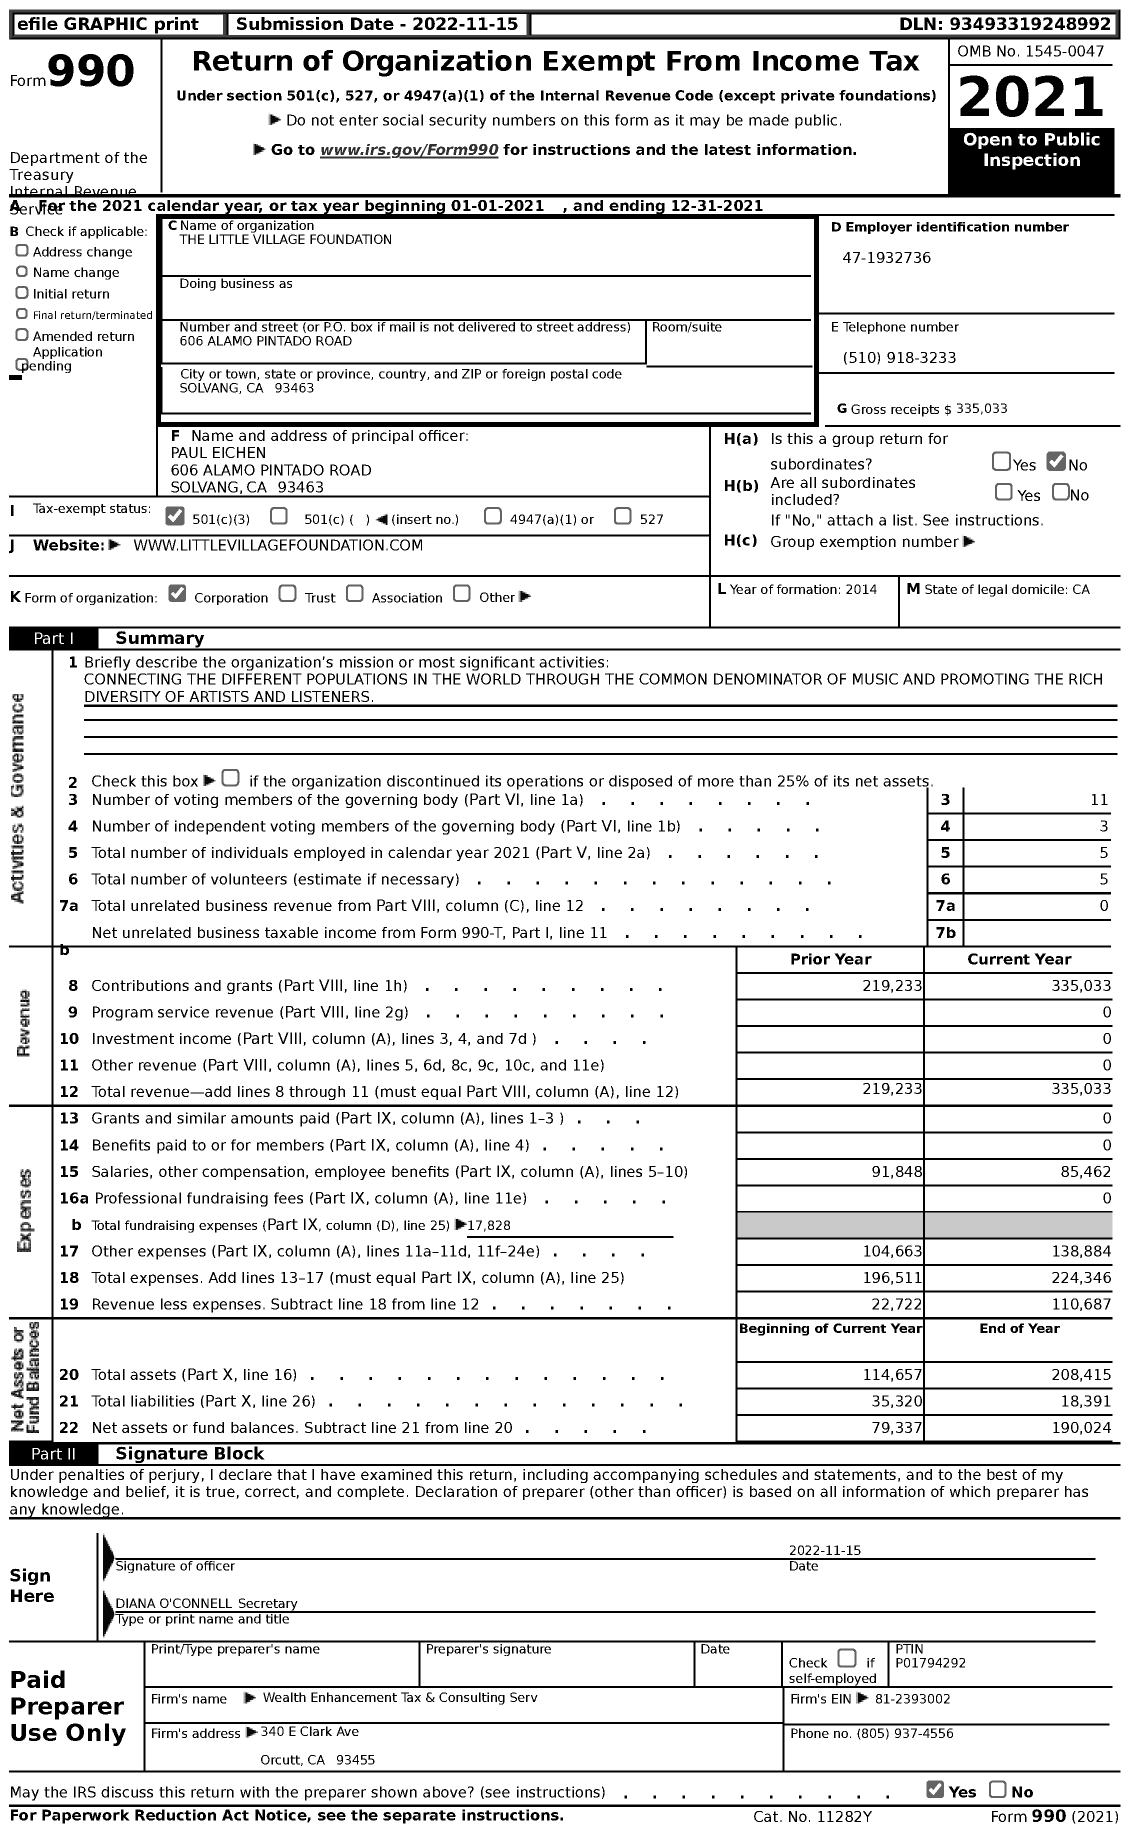 Image of first page of 2021 Form 990 for The Little Village Foundation